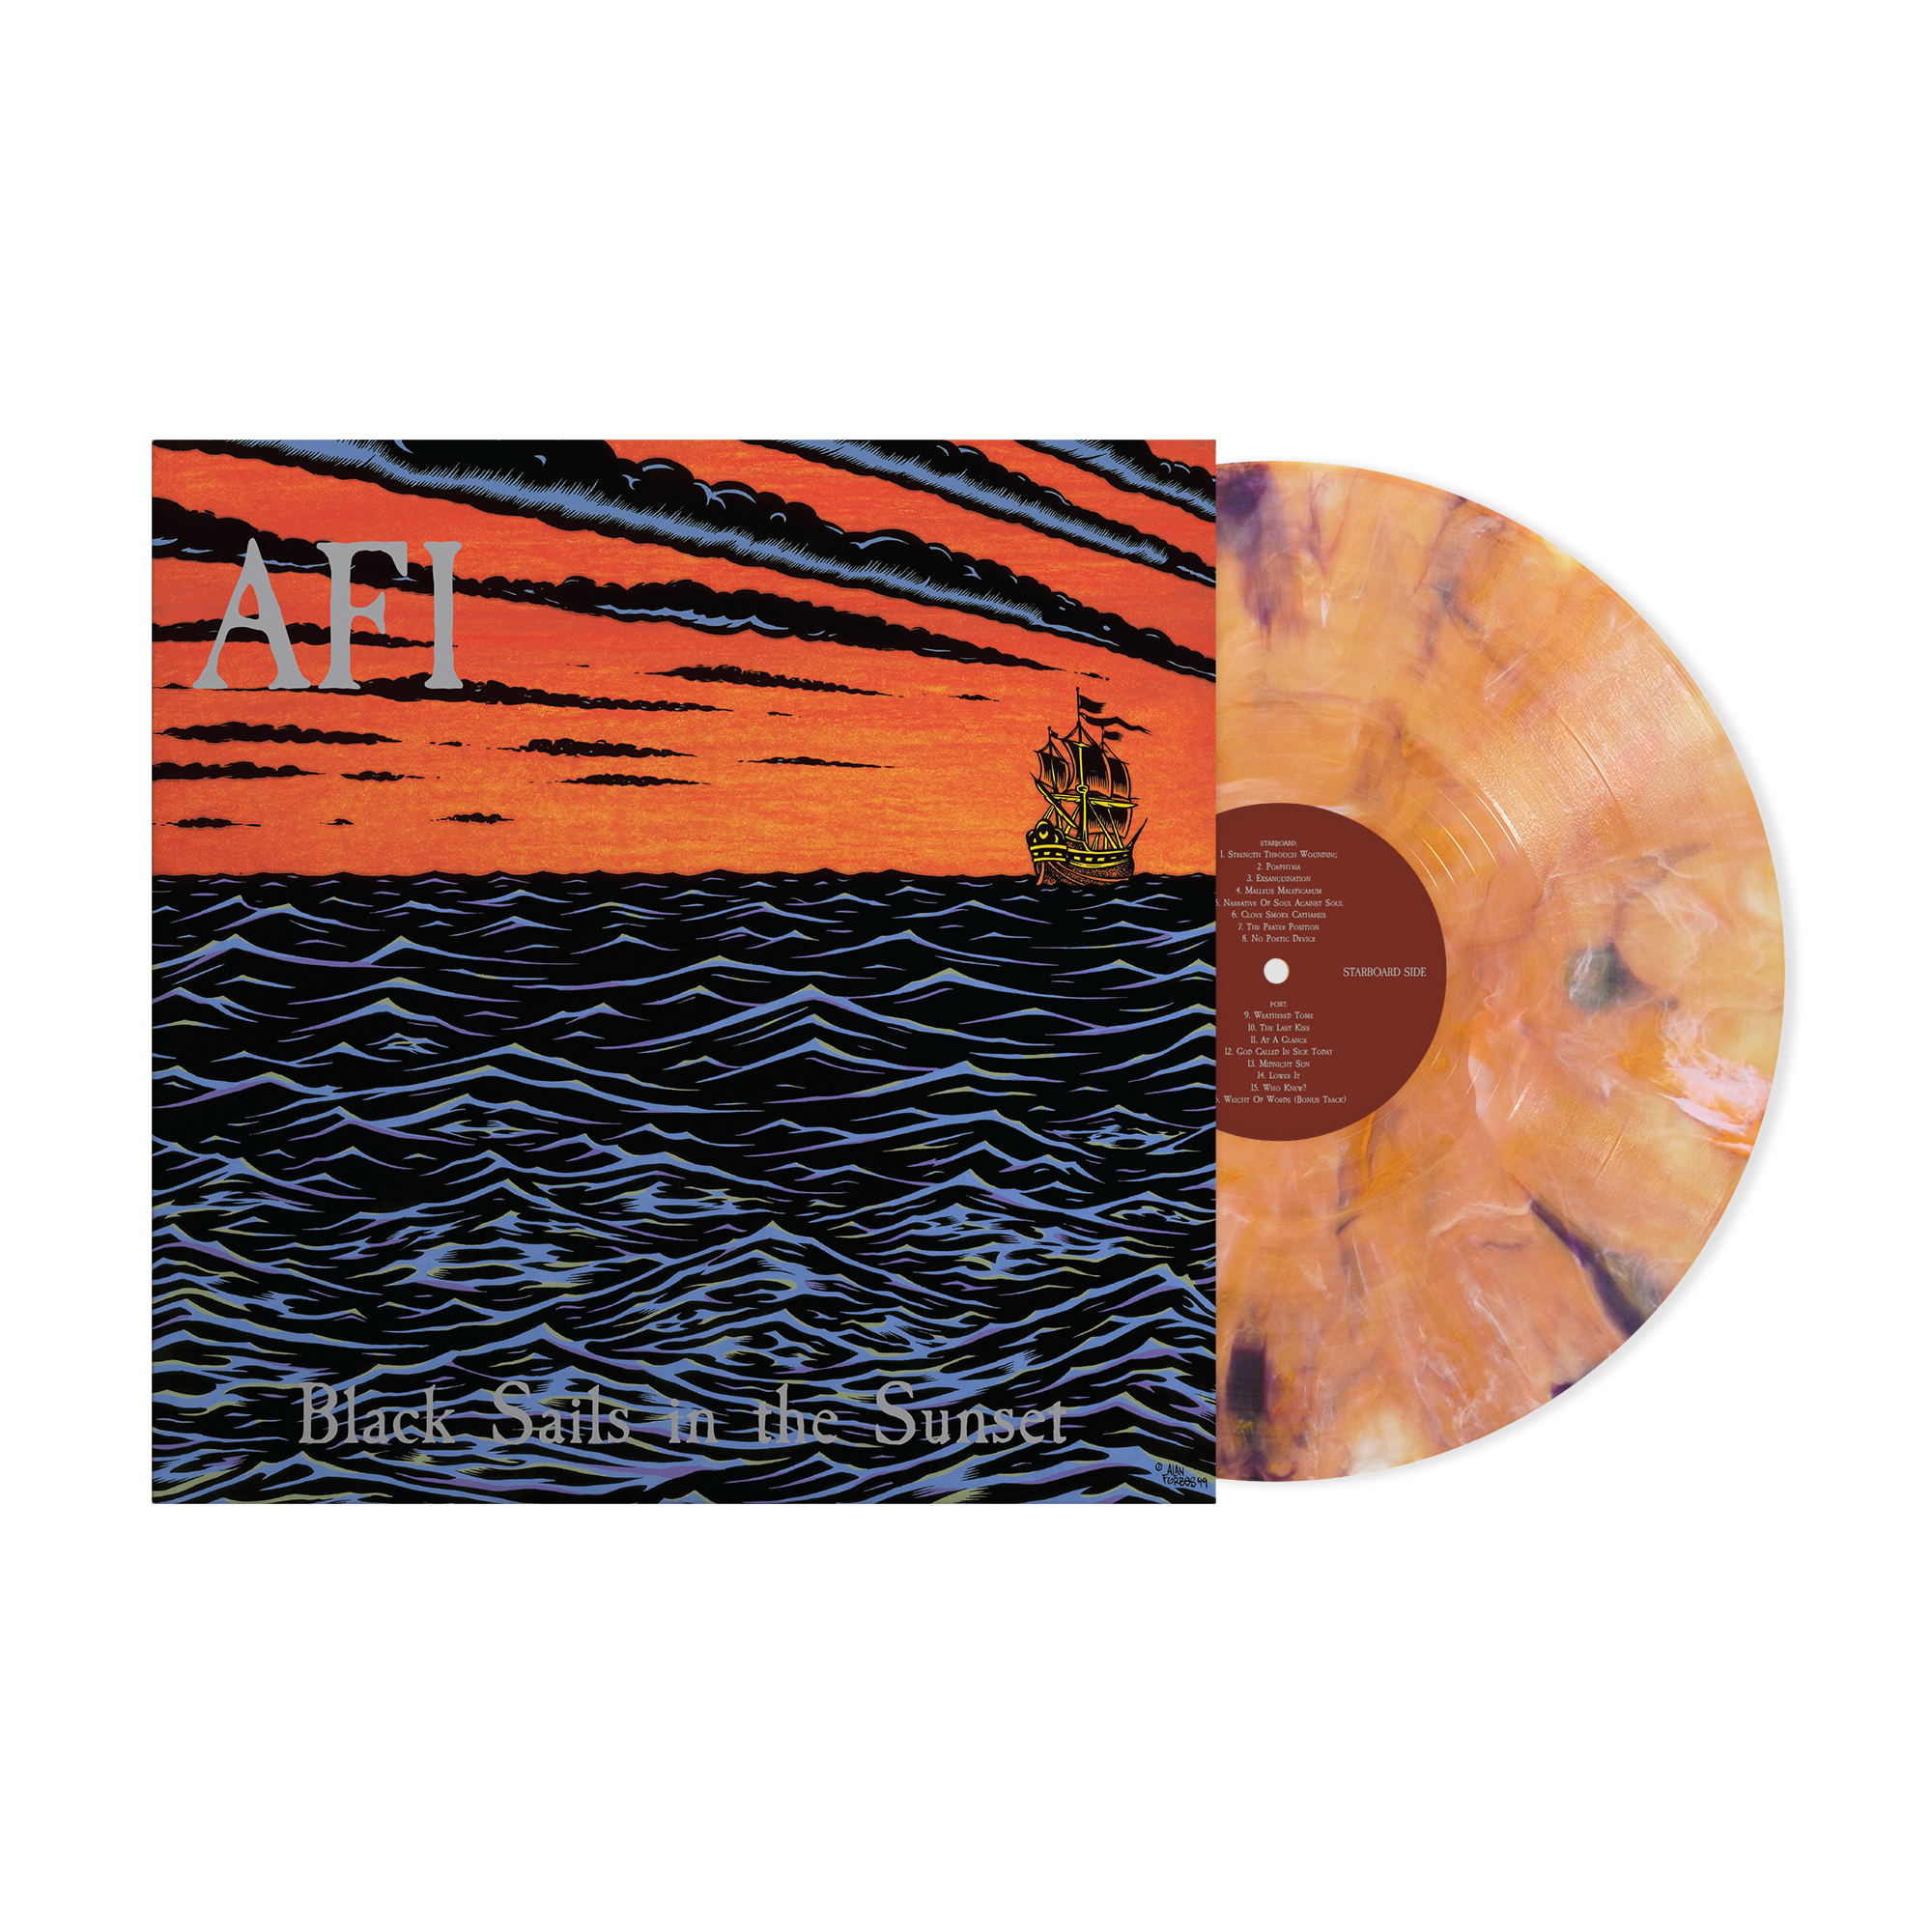 Black Sails in the Sunset 25th Anniversary (Exclusive LP, Tropical Sunset Pressing - Limited Edition of 500)